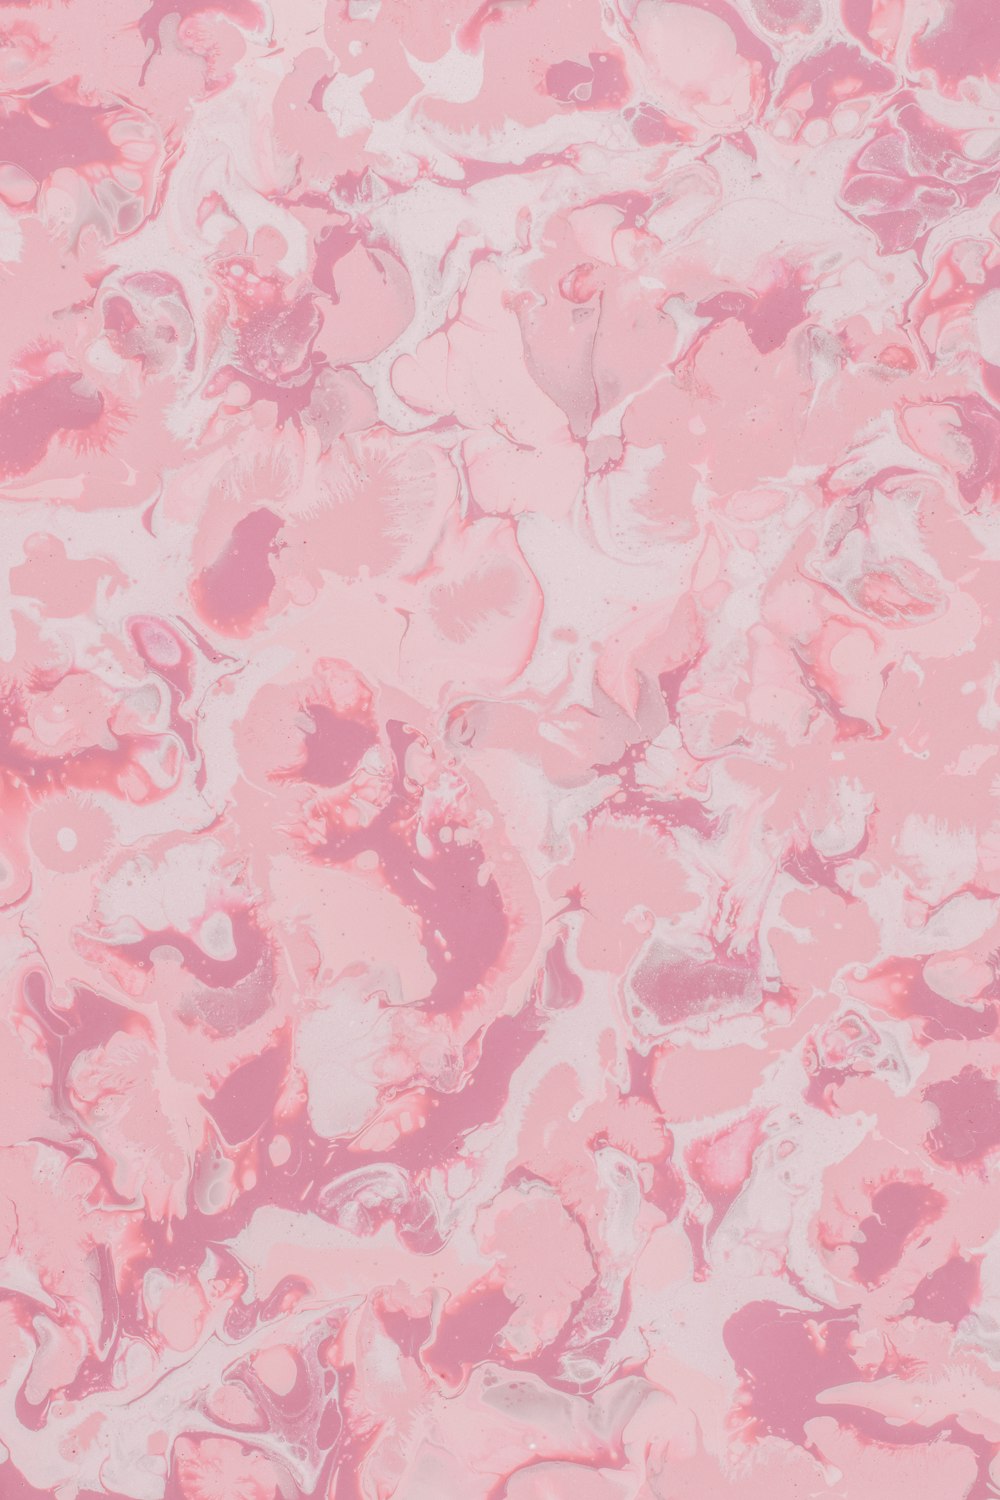 a pink and white marble texture background